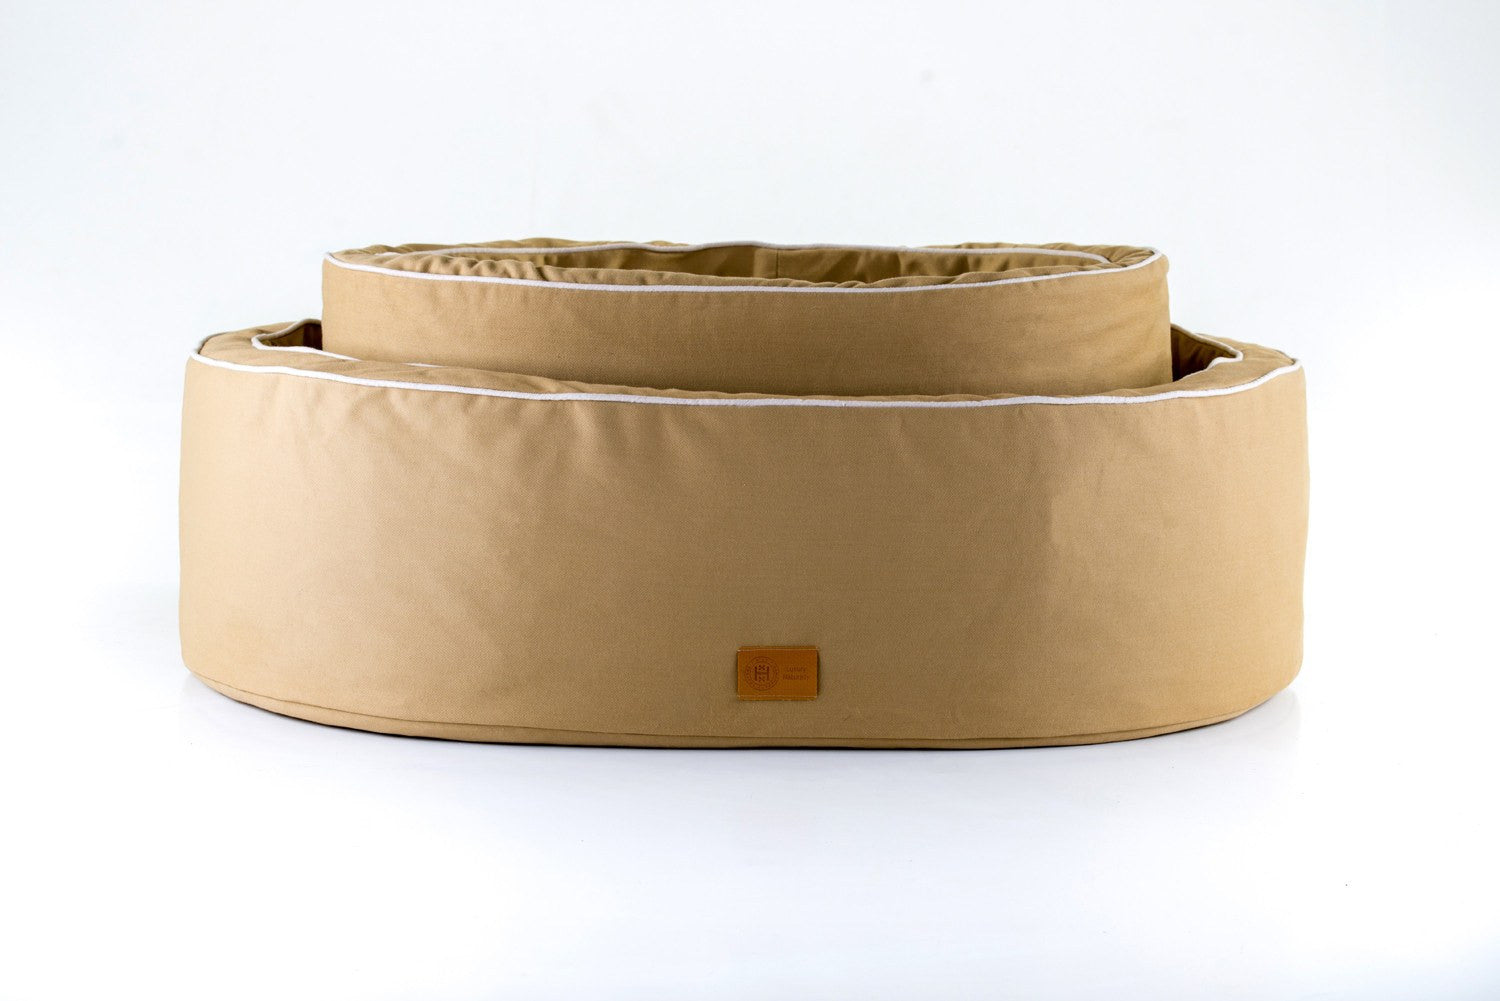 Sand and cream bull denim cotton natural Nest dog bed from Hixx. Made in Britain.